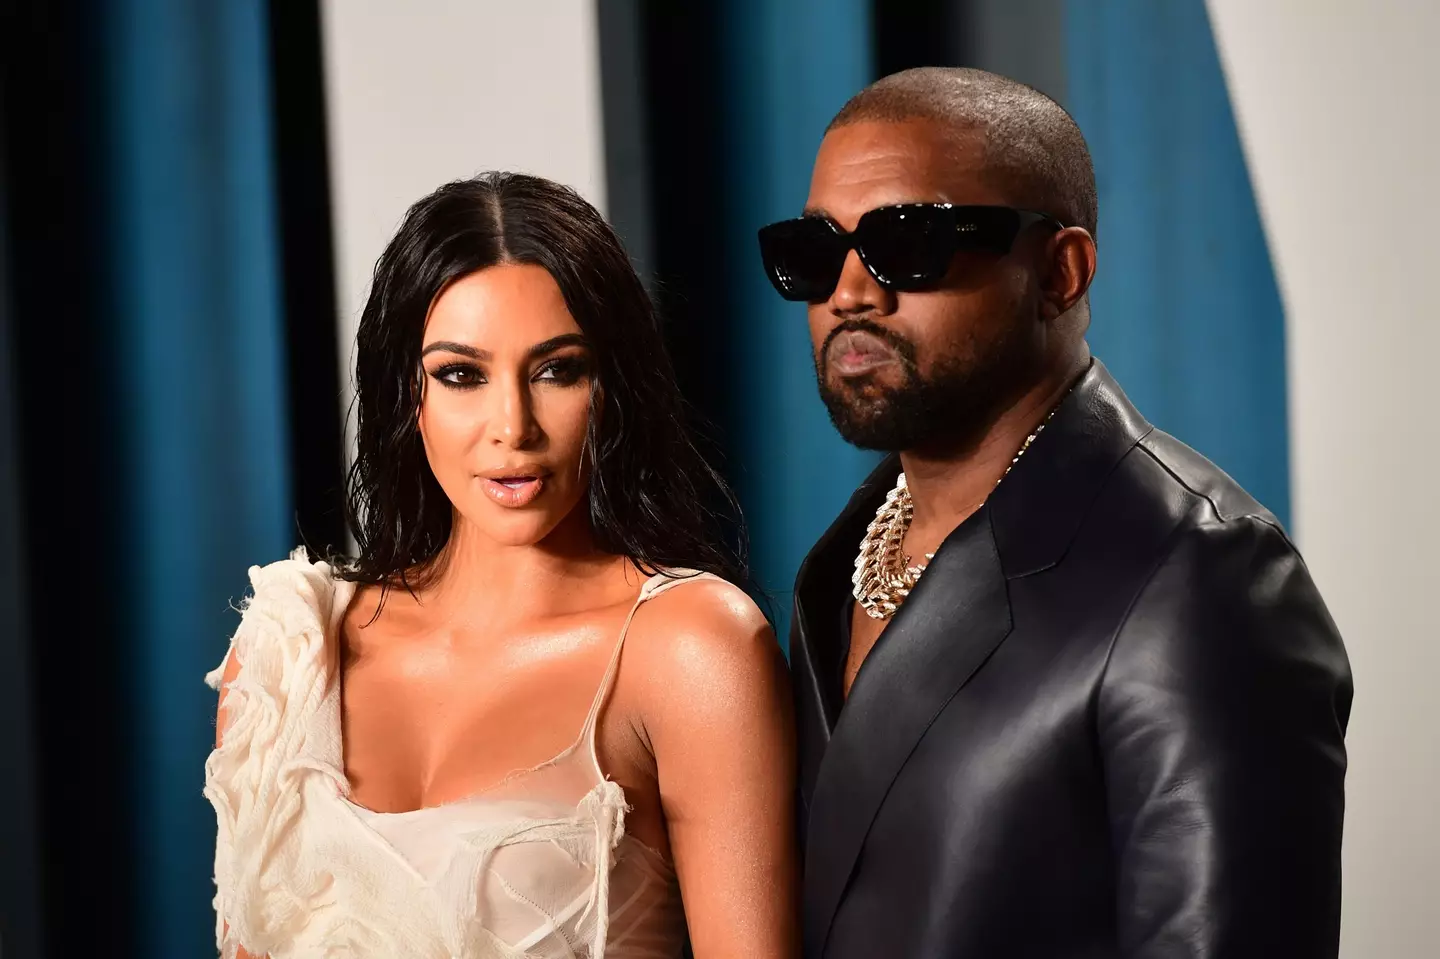 Kanye West dated Fox after his divorce from Kim Kardashian.